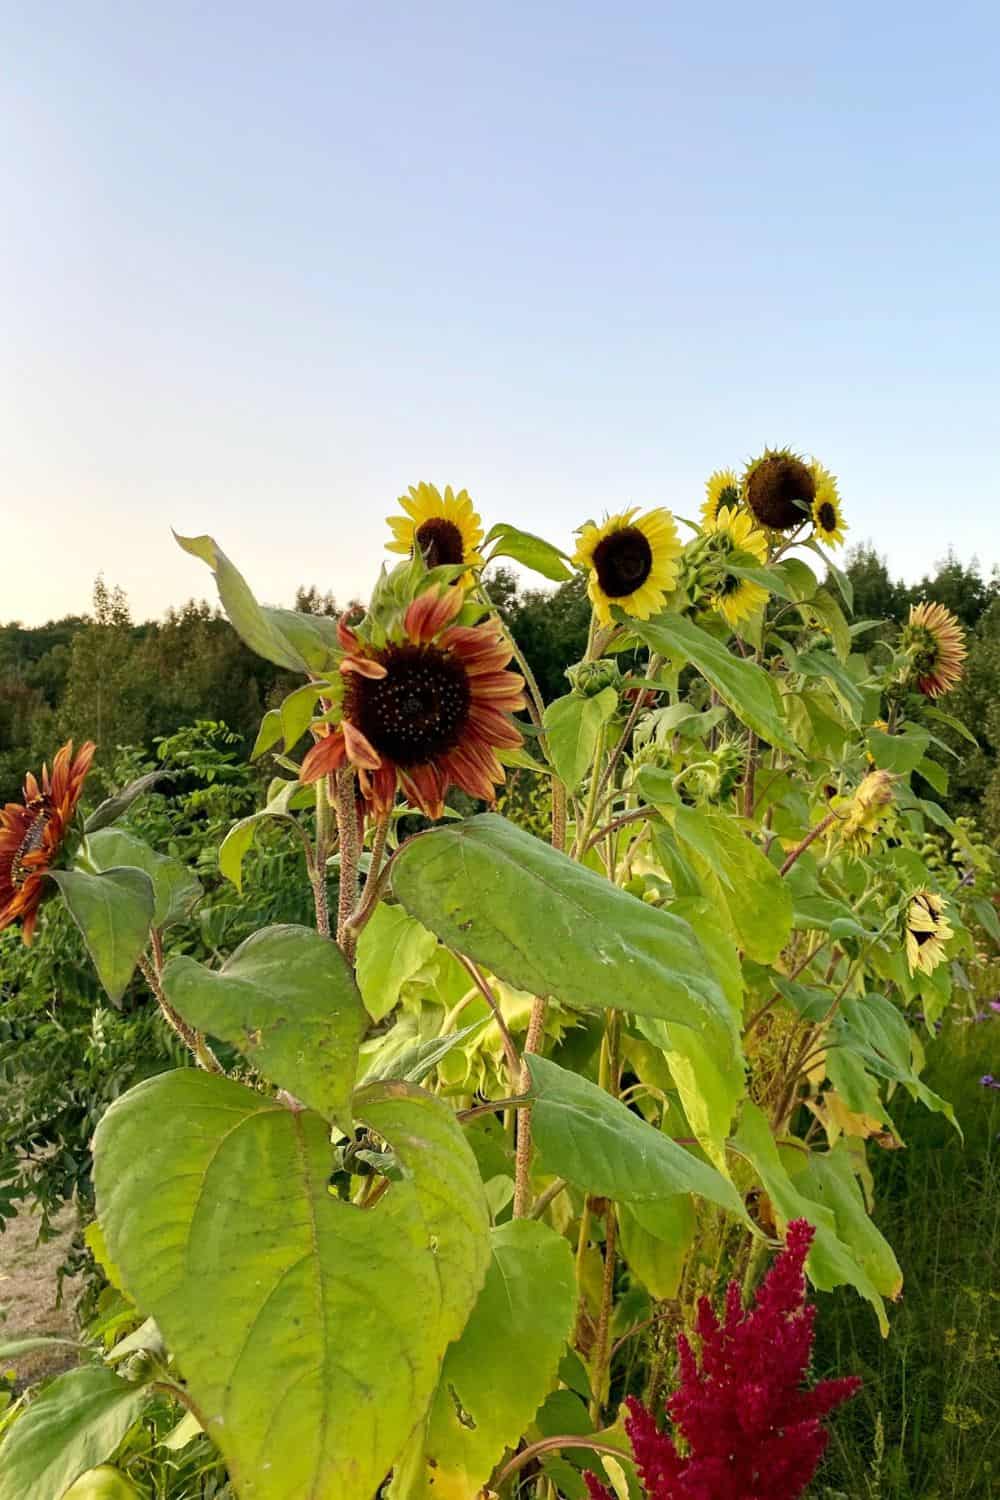 A variety of sunflowers growing together in a row